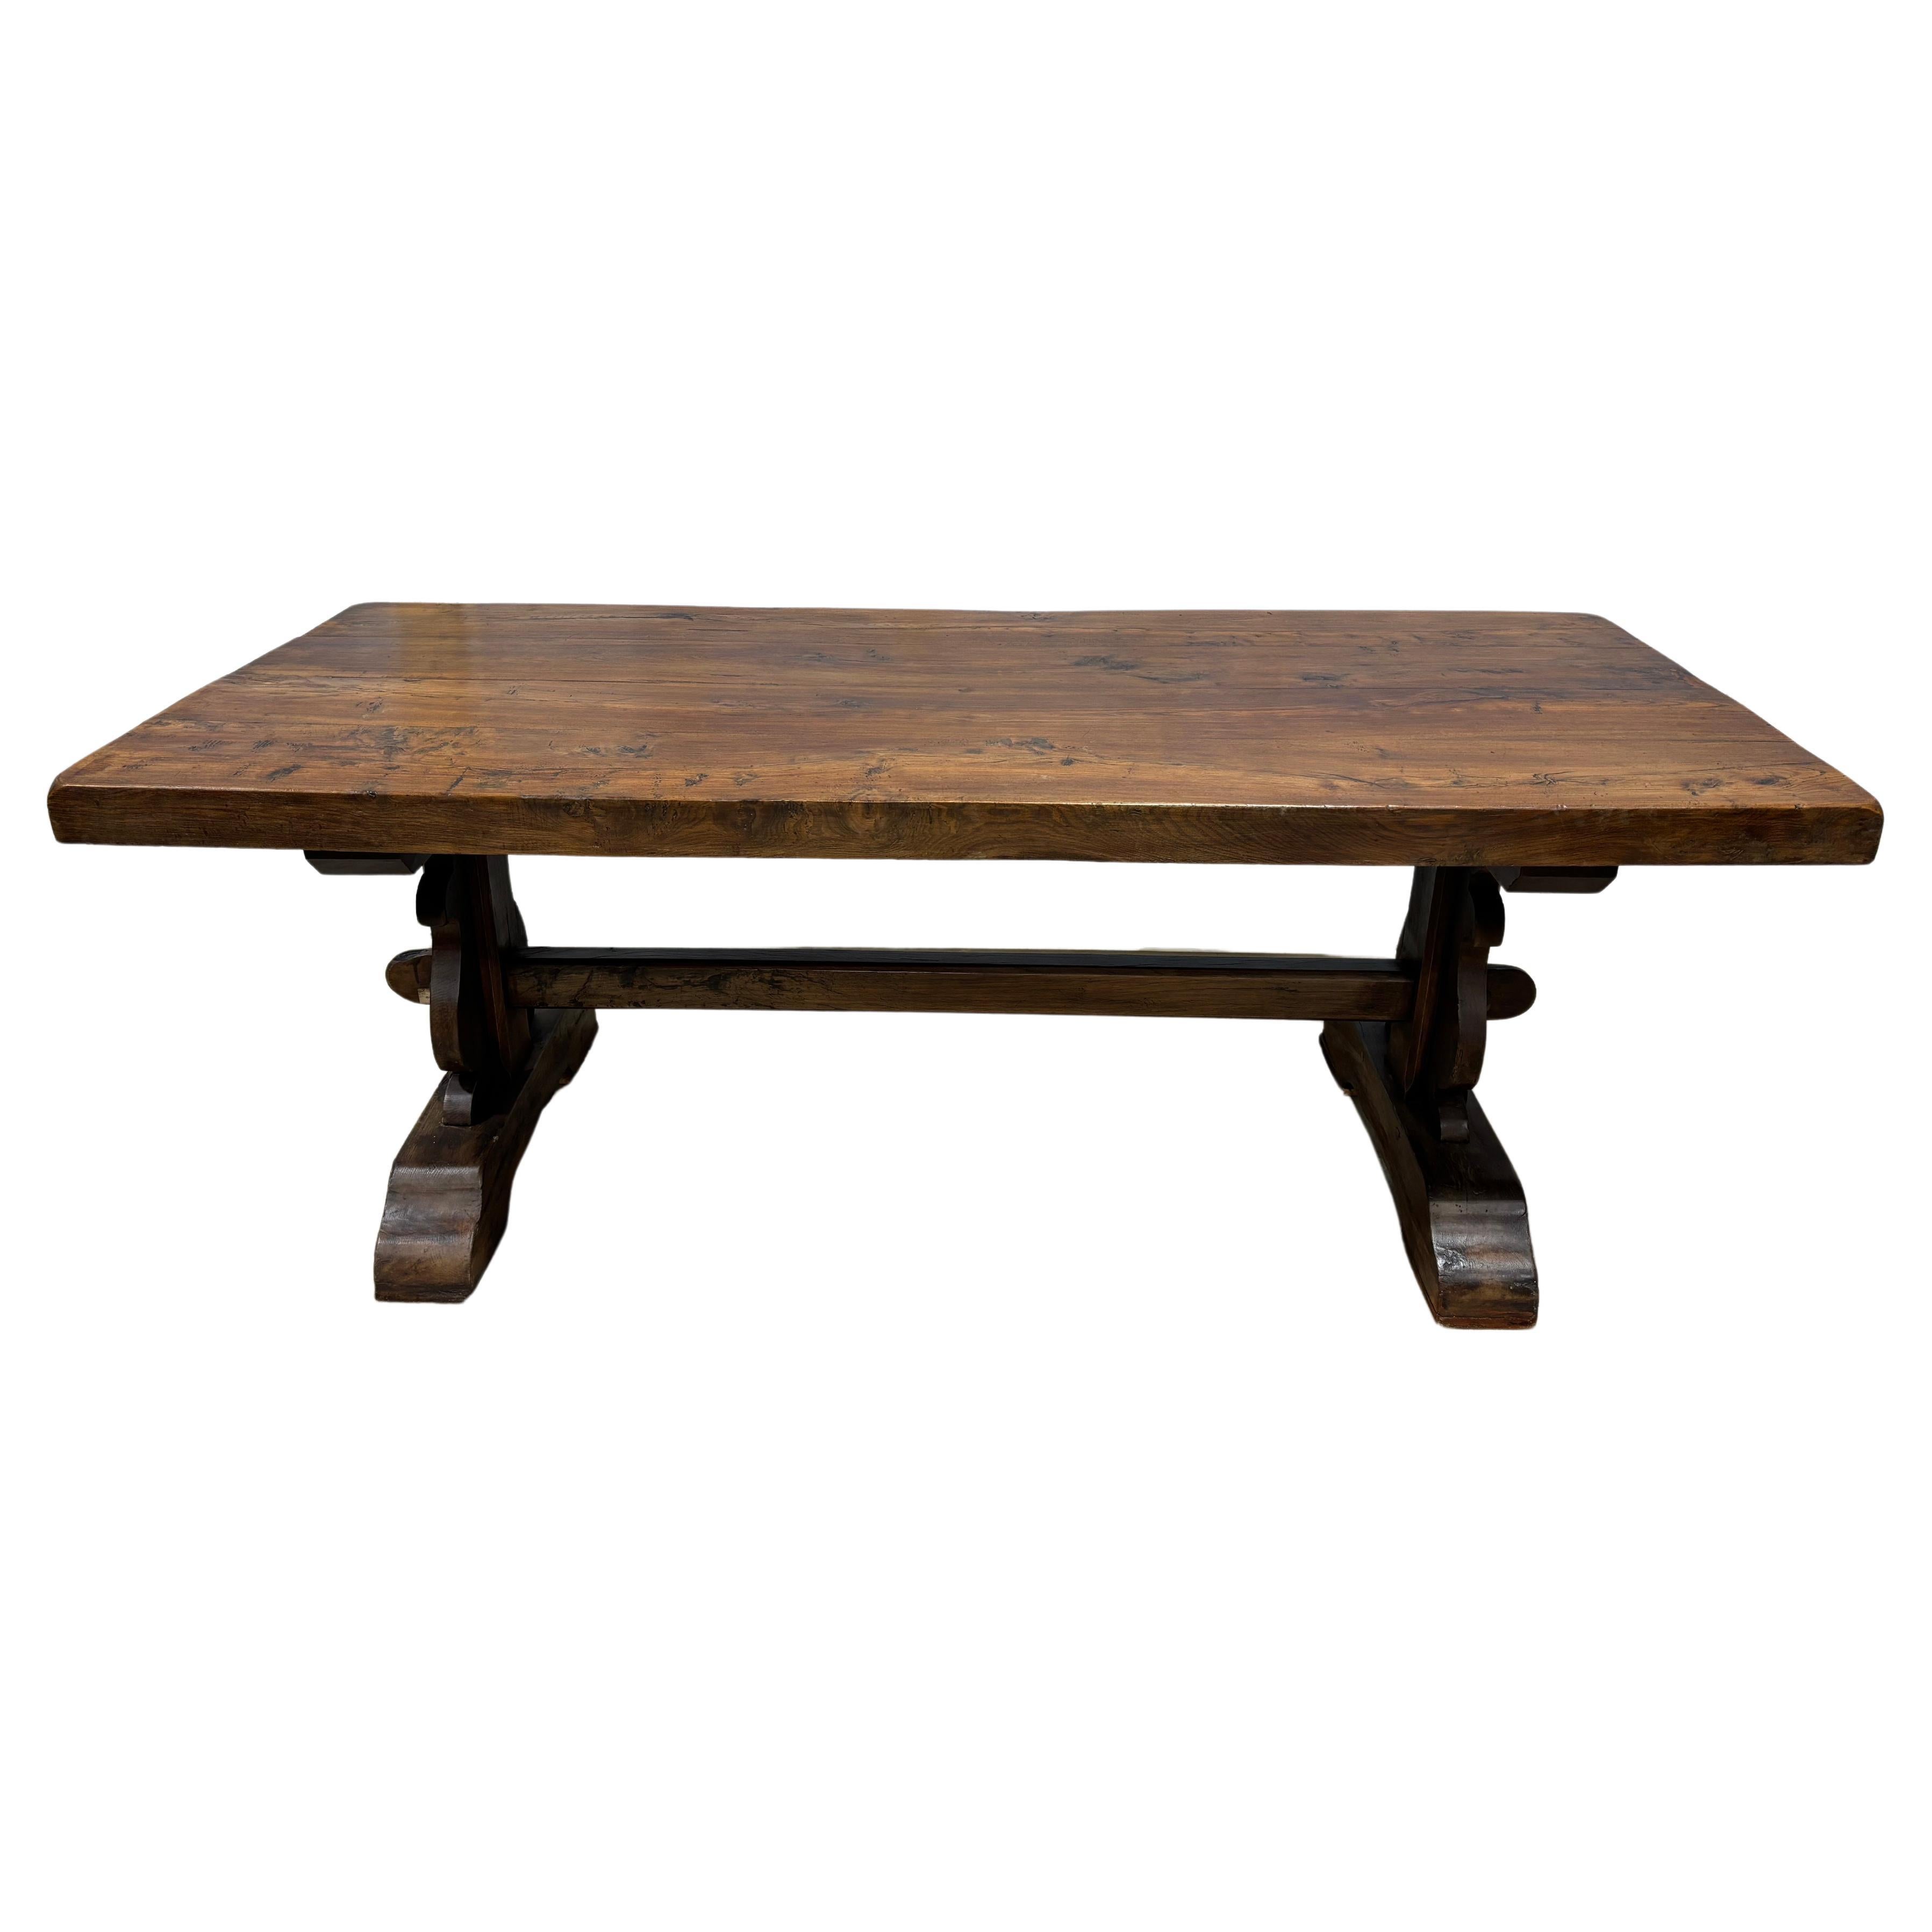 Wonderful thick and strong table made of walnut.